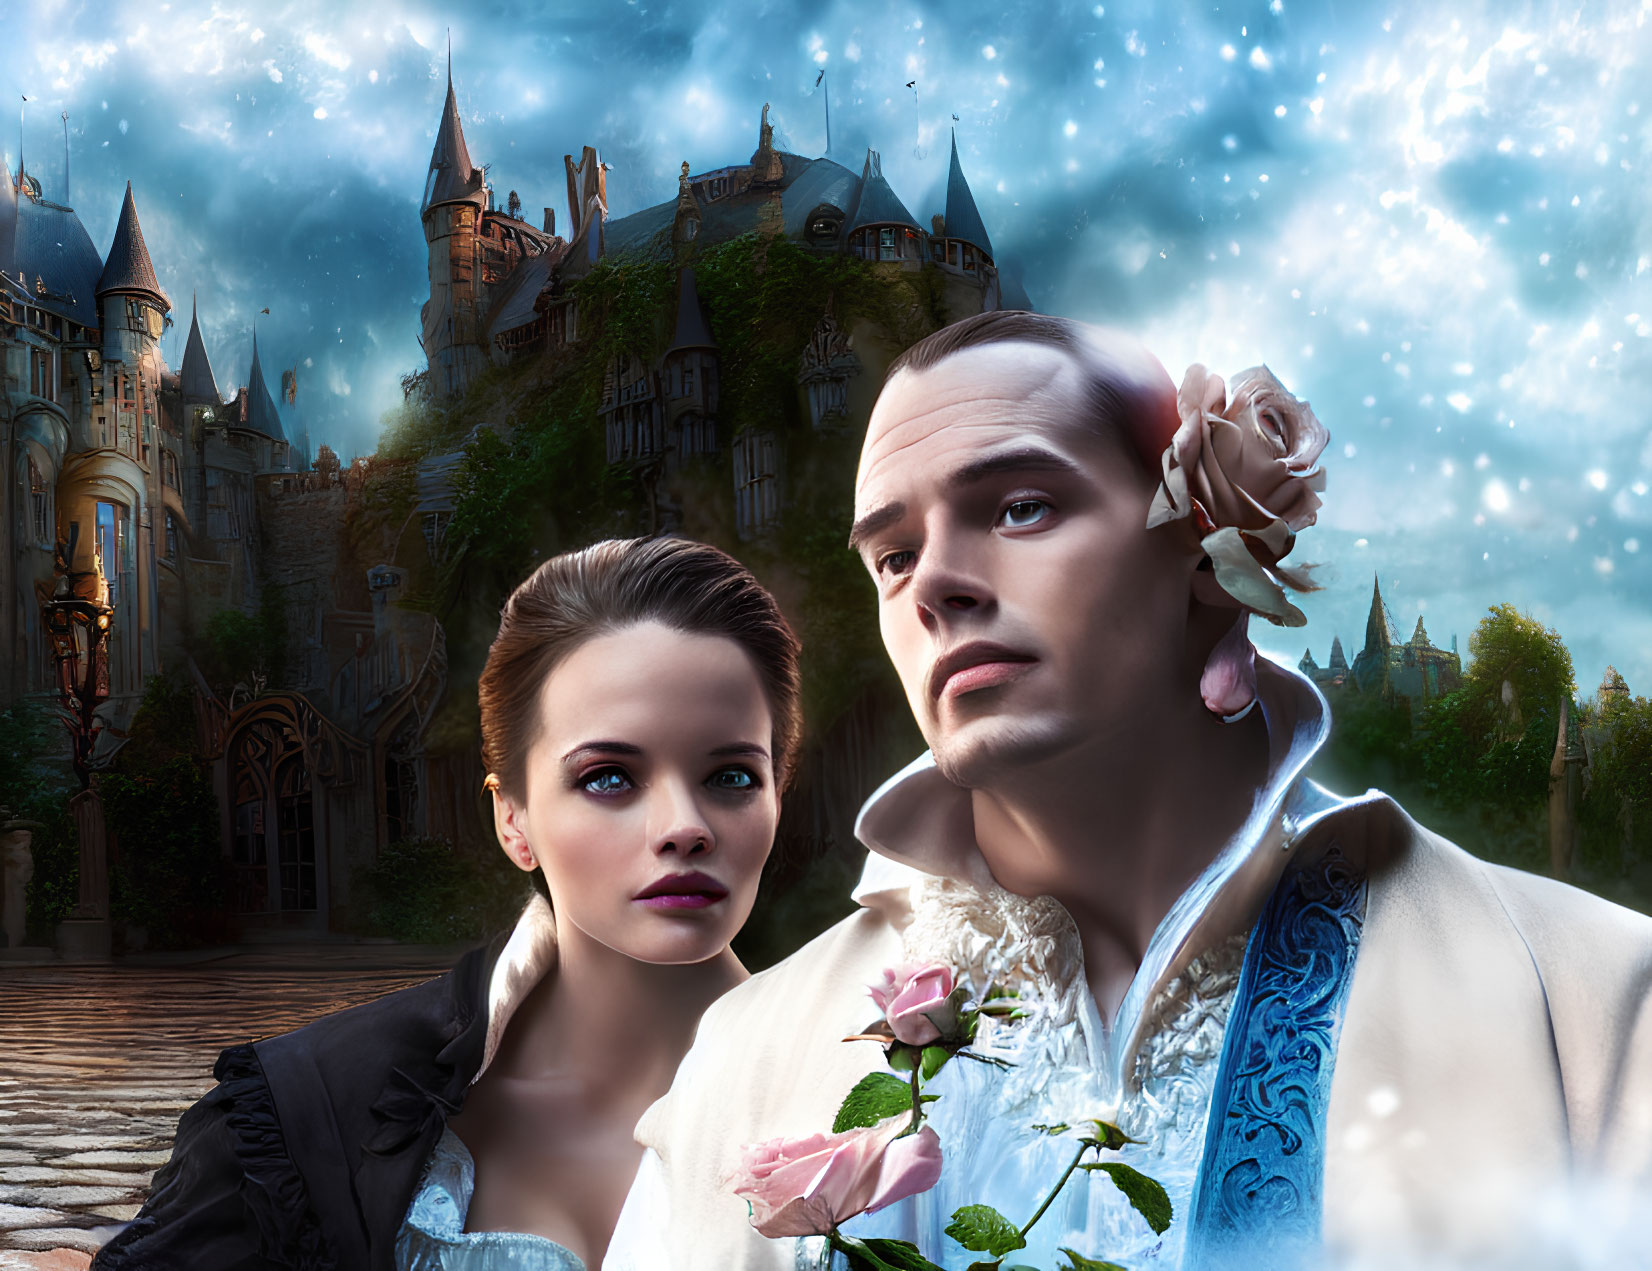 Man and woman in historical attire with castle backdrop and starry sky.